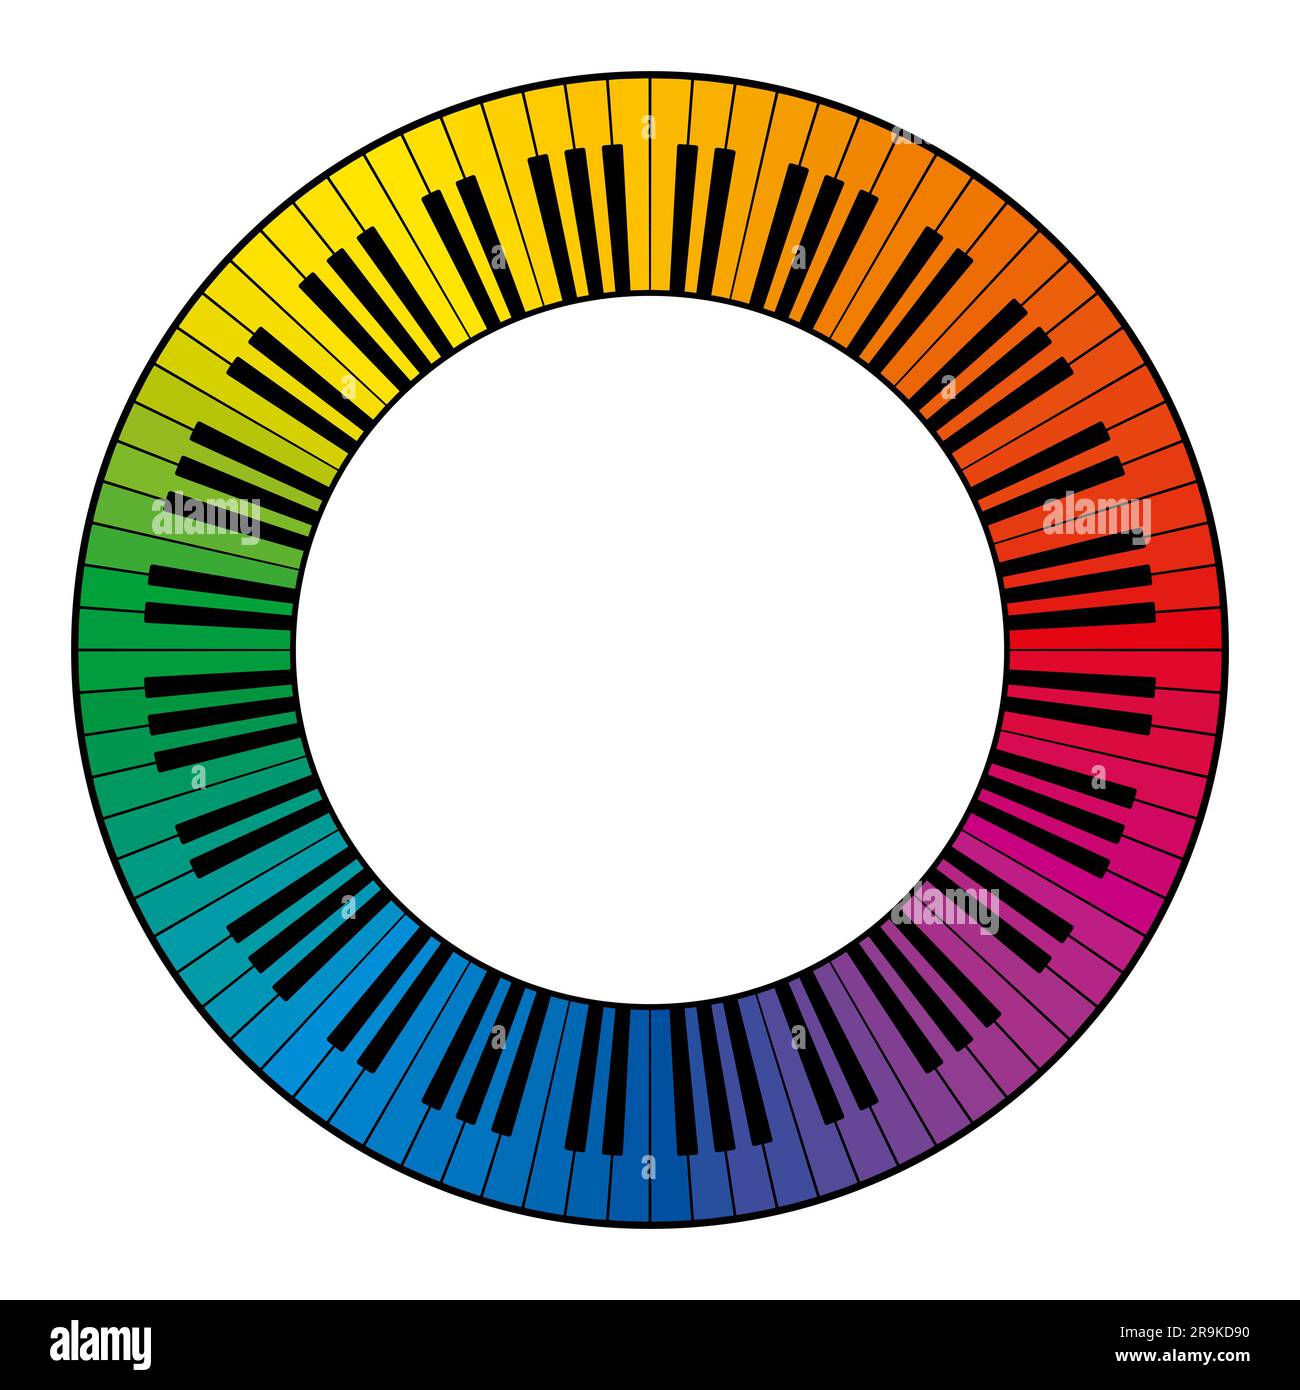 Musical keyboard, circle frame, with twelve octaves of rainbow colored keys. Decorative border, constructed from multicolored keys of a piano keyboard Stock Photo